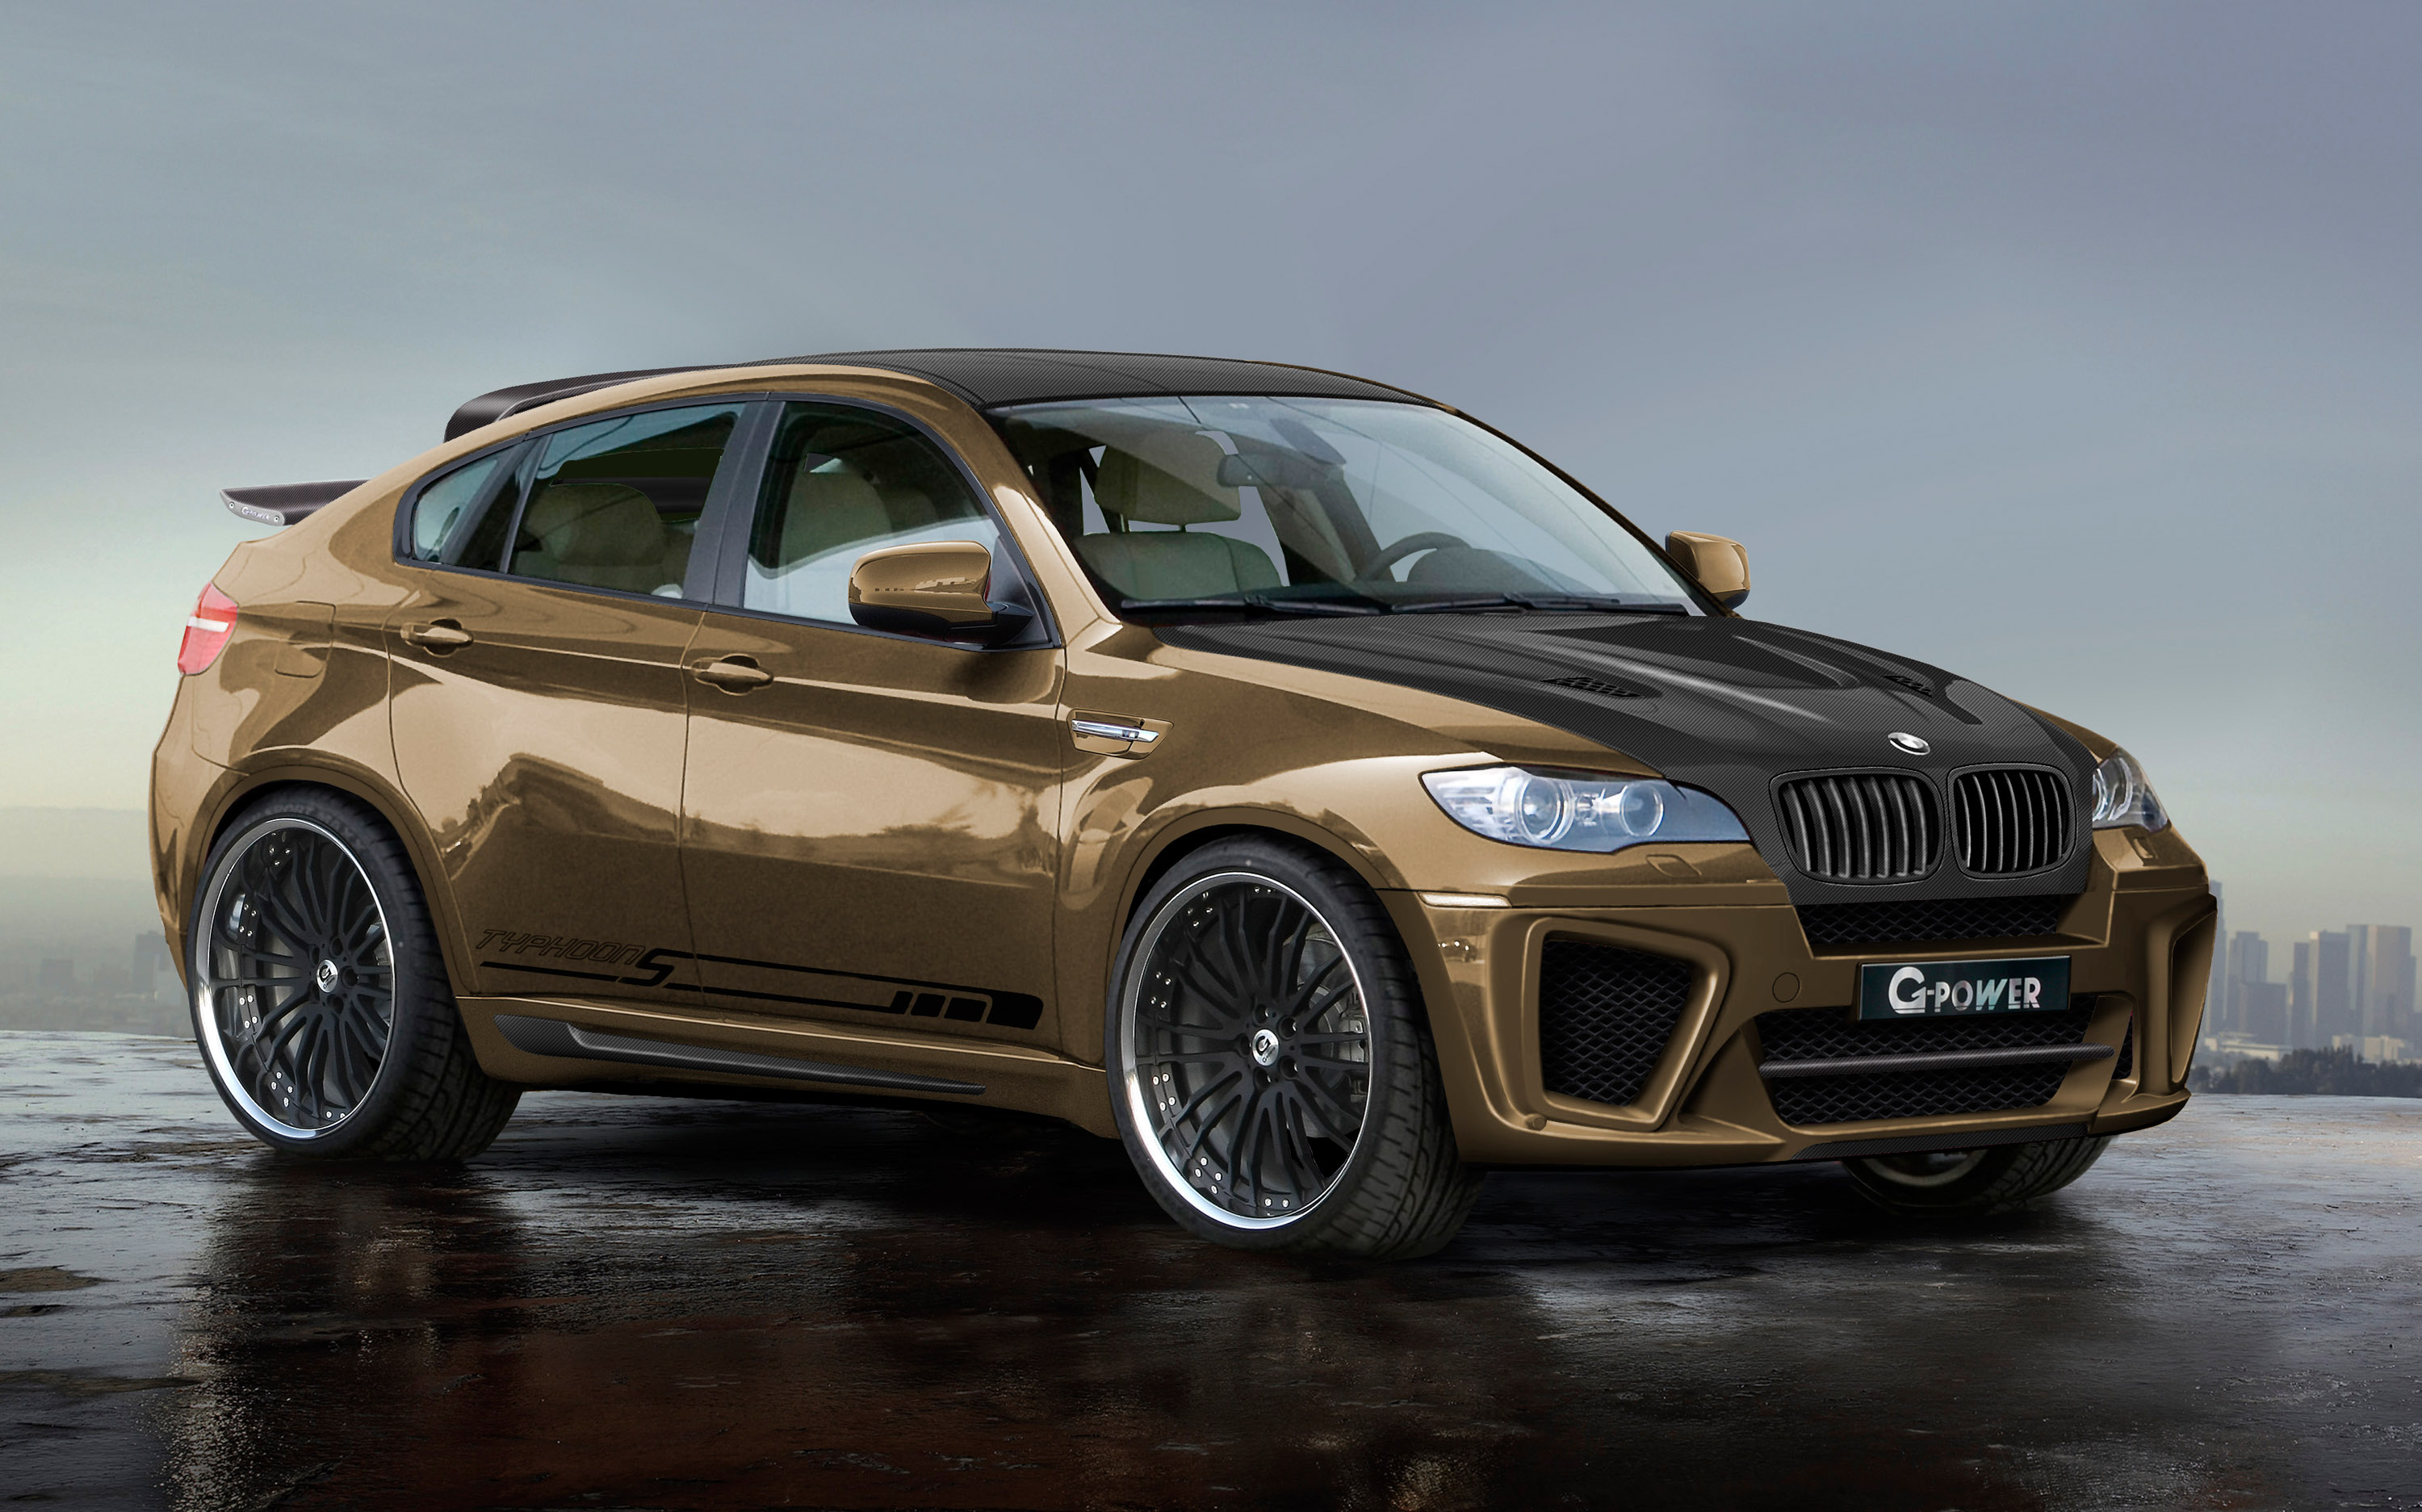 Power Bmw X5 M And X6 Car Tuning